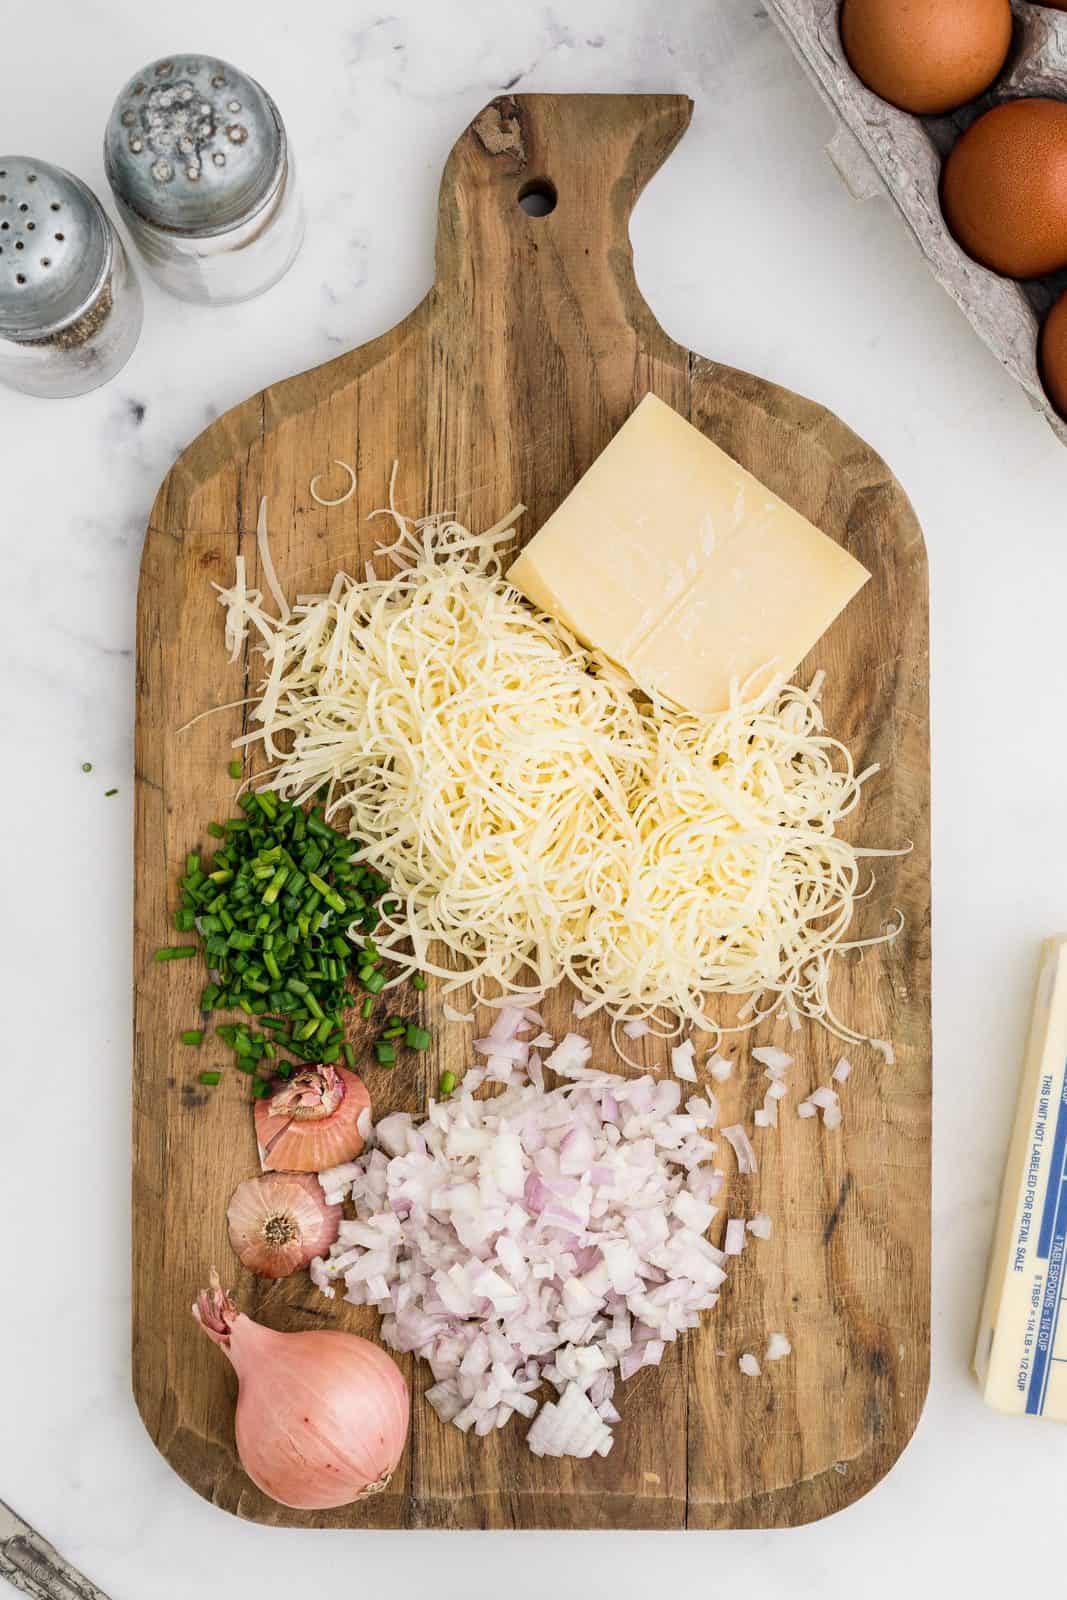 Chopped and grated cheese, chives and shallots.